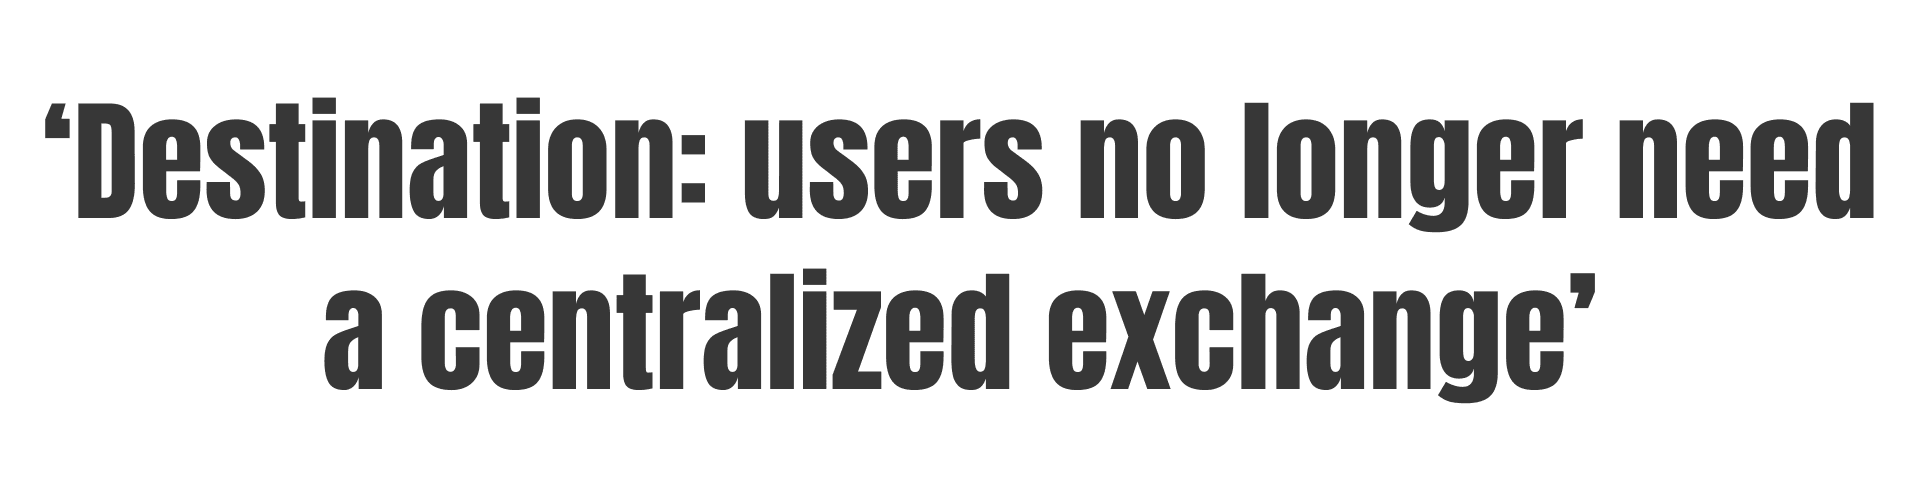 users no longer need a centralized exchange